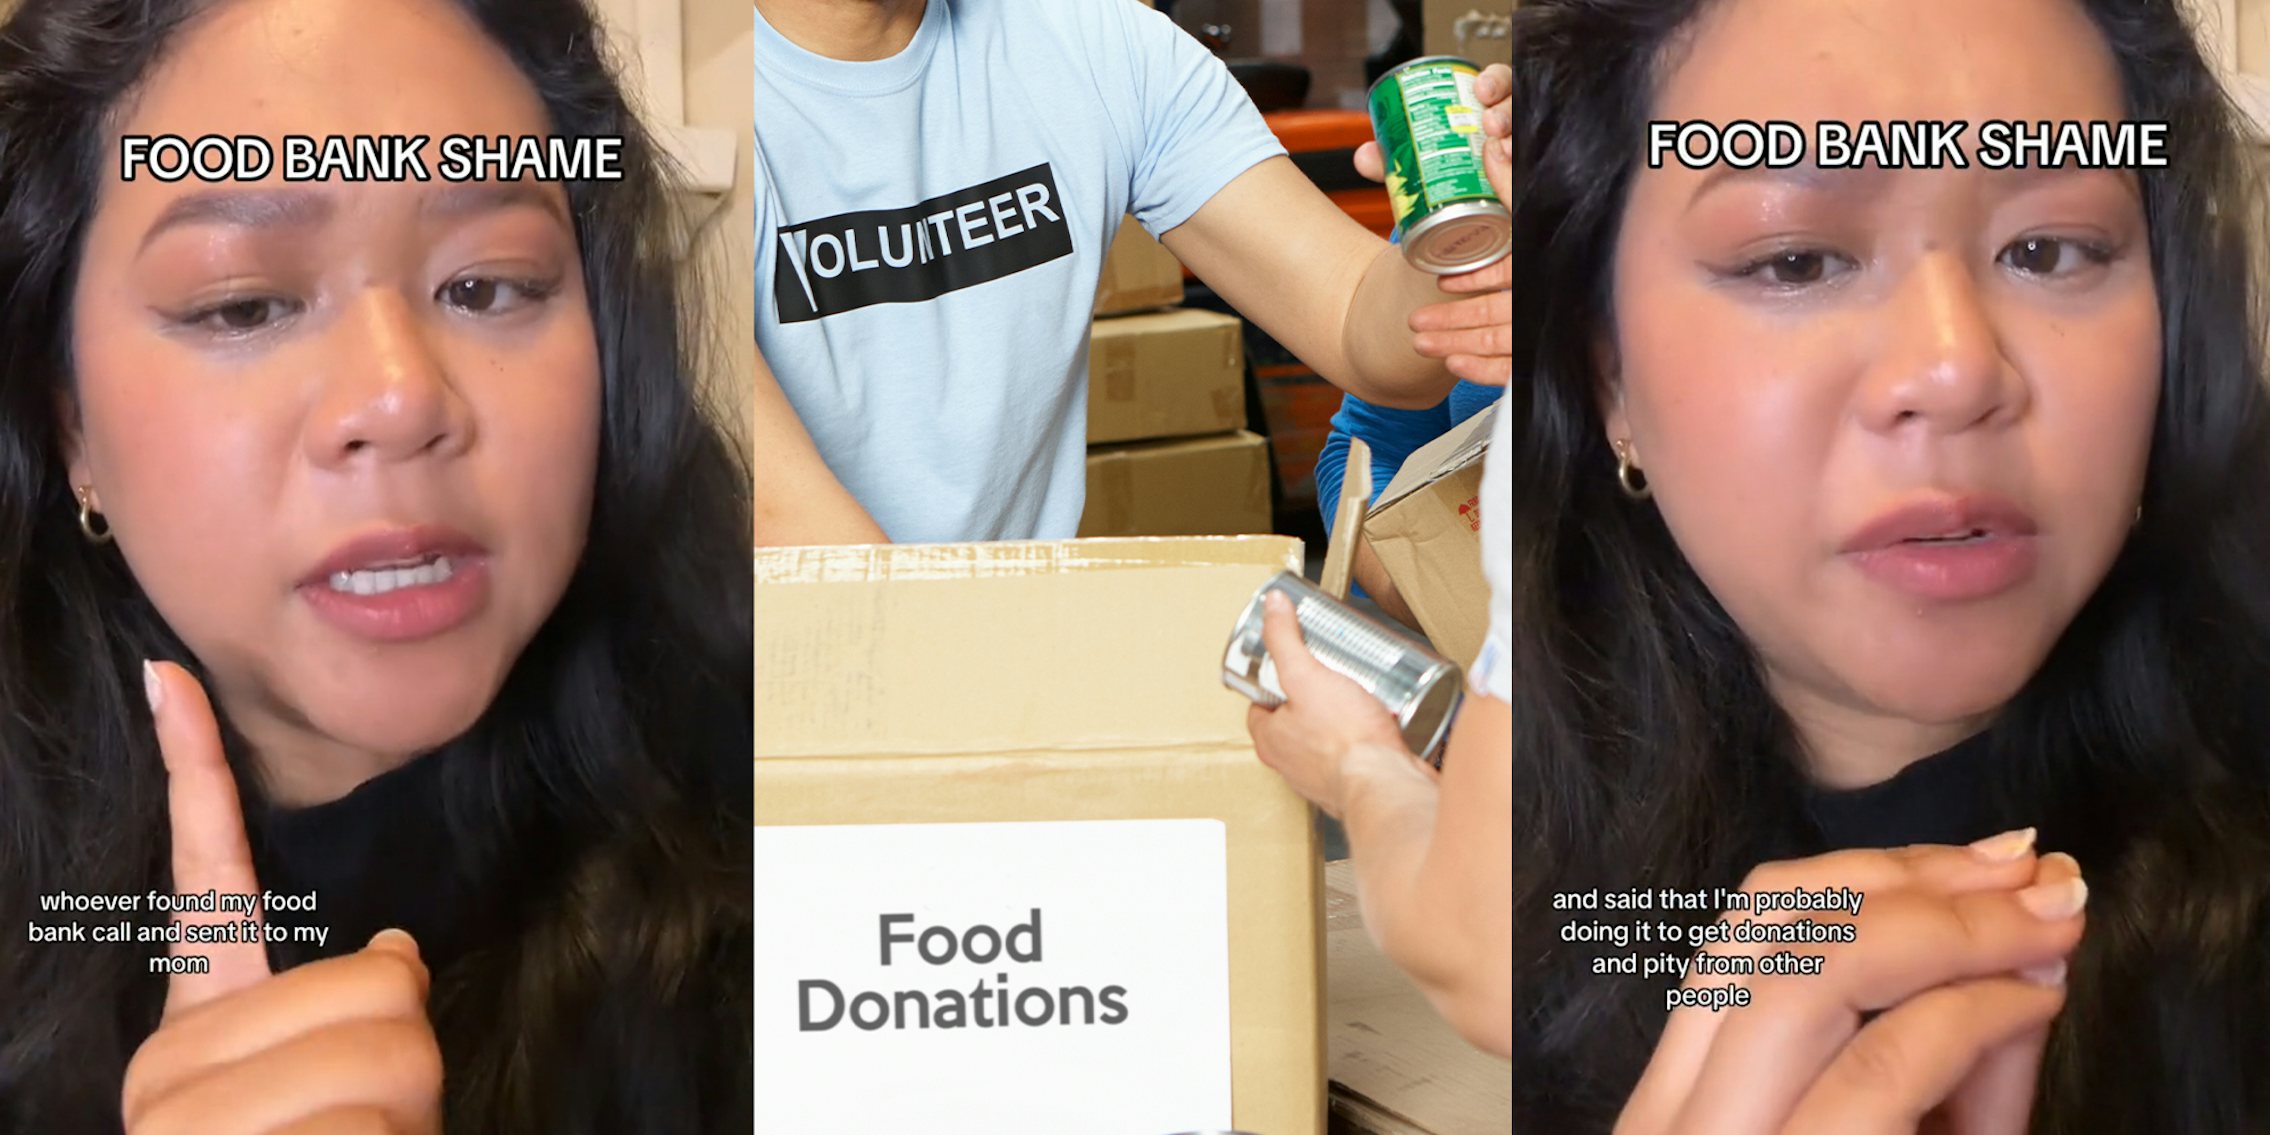 woman explaining how she was shamed for sharing her Food Bank haul